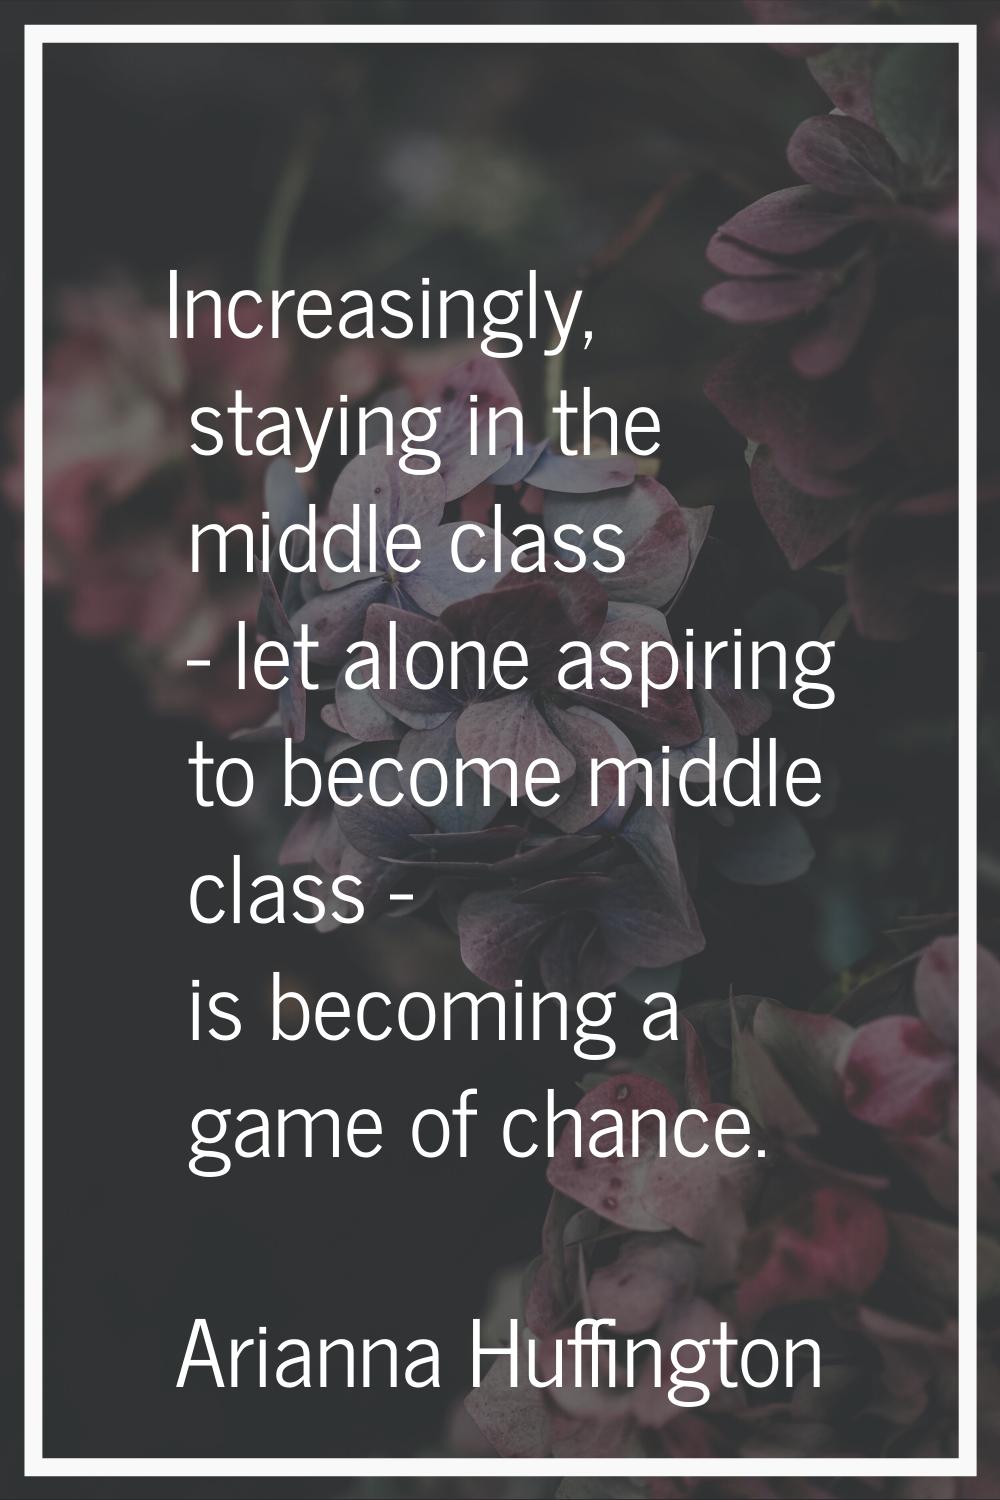 Increasingly, staying in the middle class - let alone aspiring to become middle class - is becoming